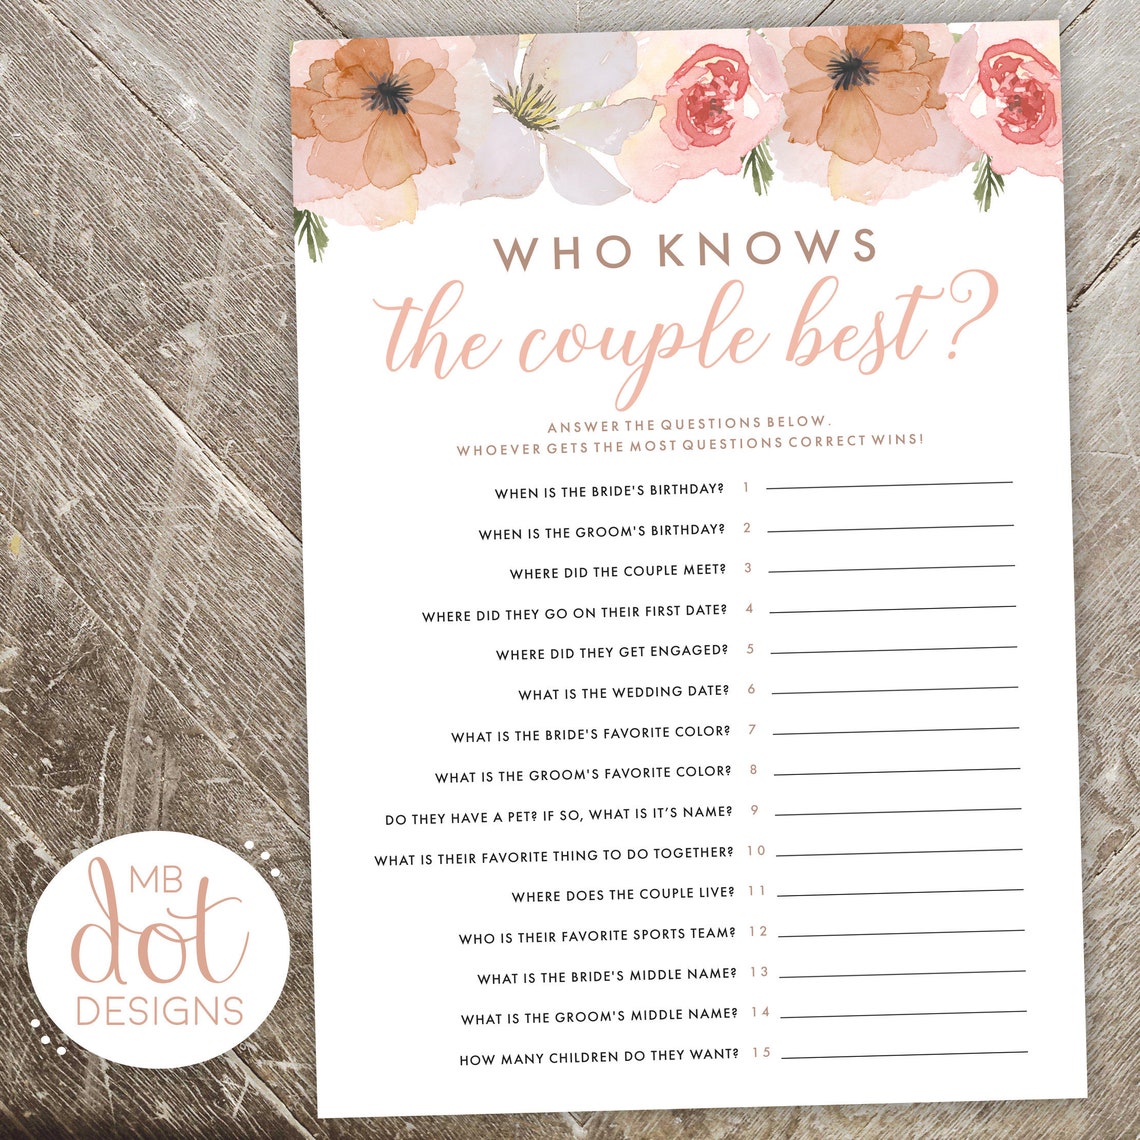 Who Knows the Couple Best printable bridal shower game | Etsy